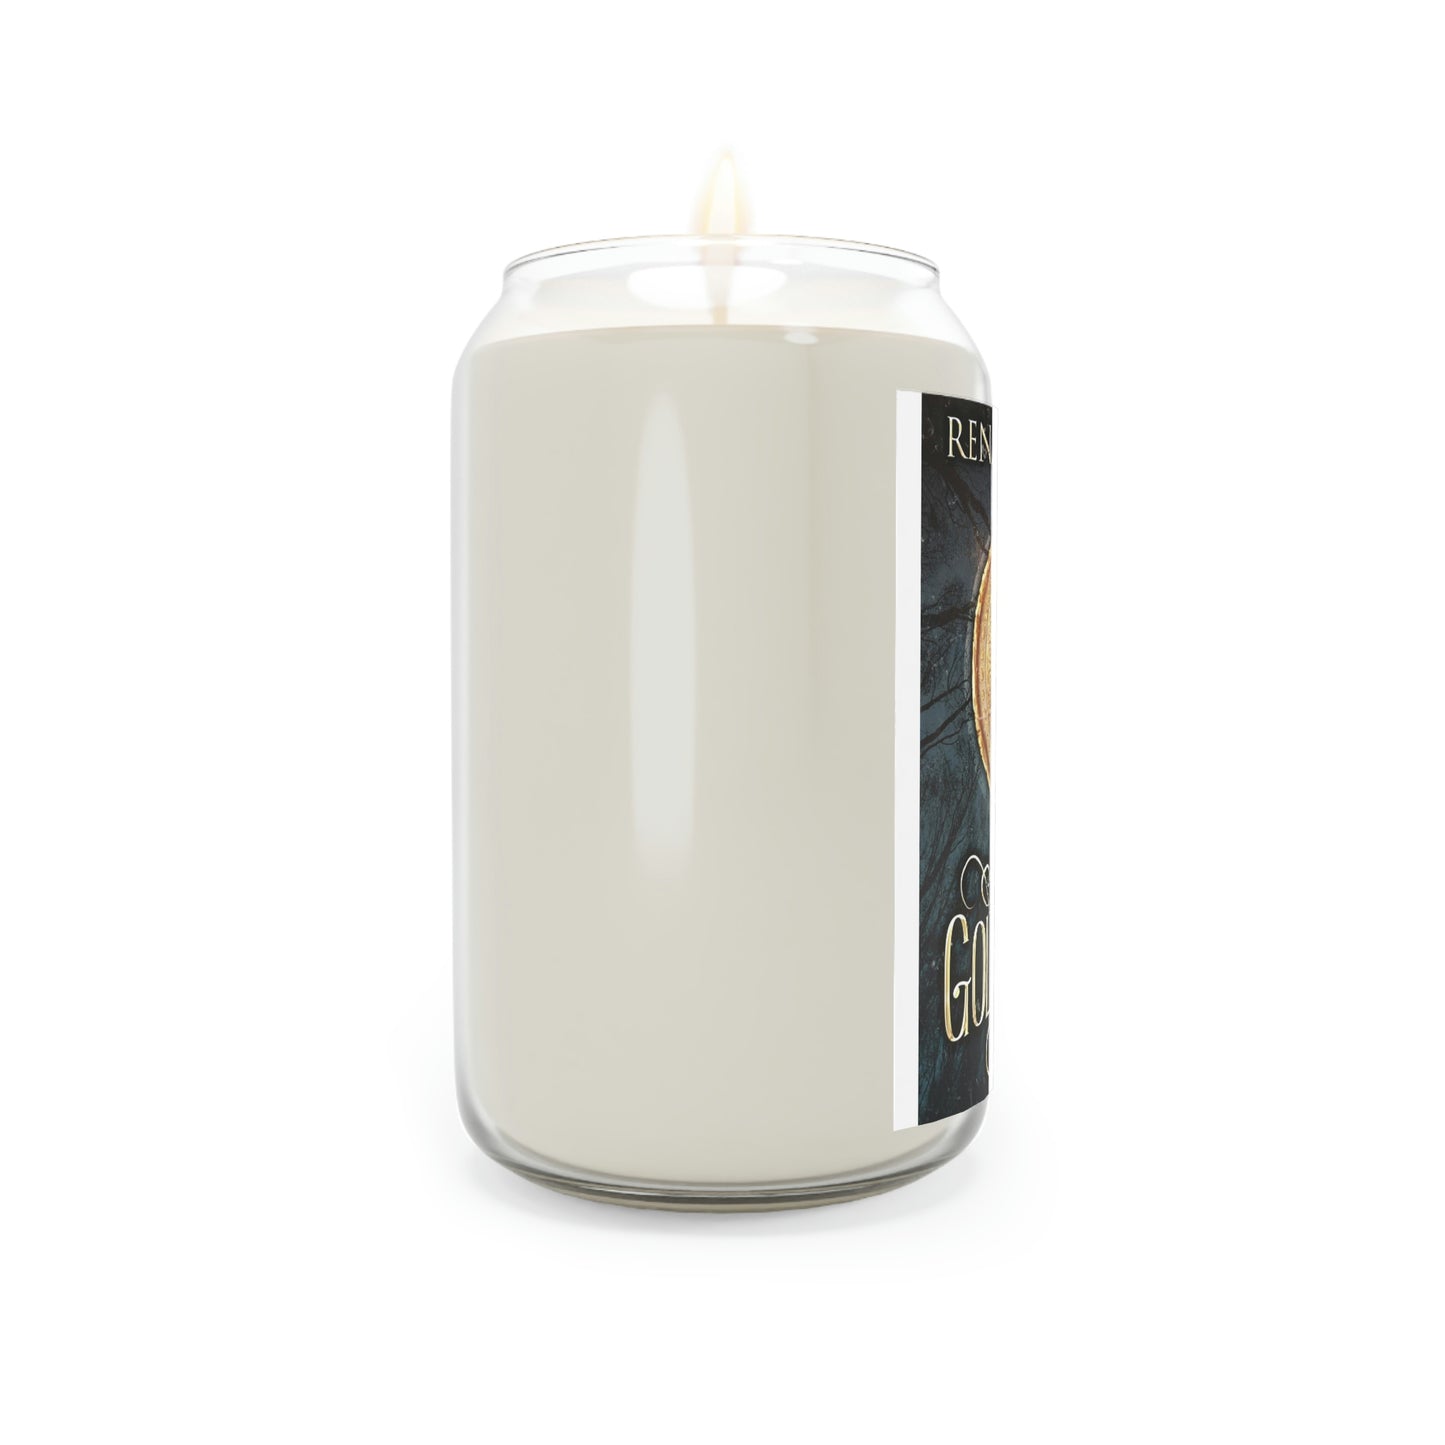 Gold Envy - Scented Candle